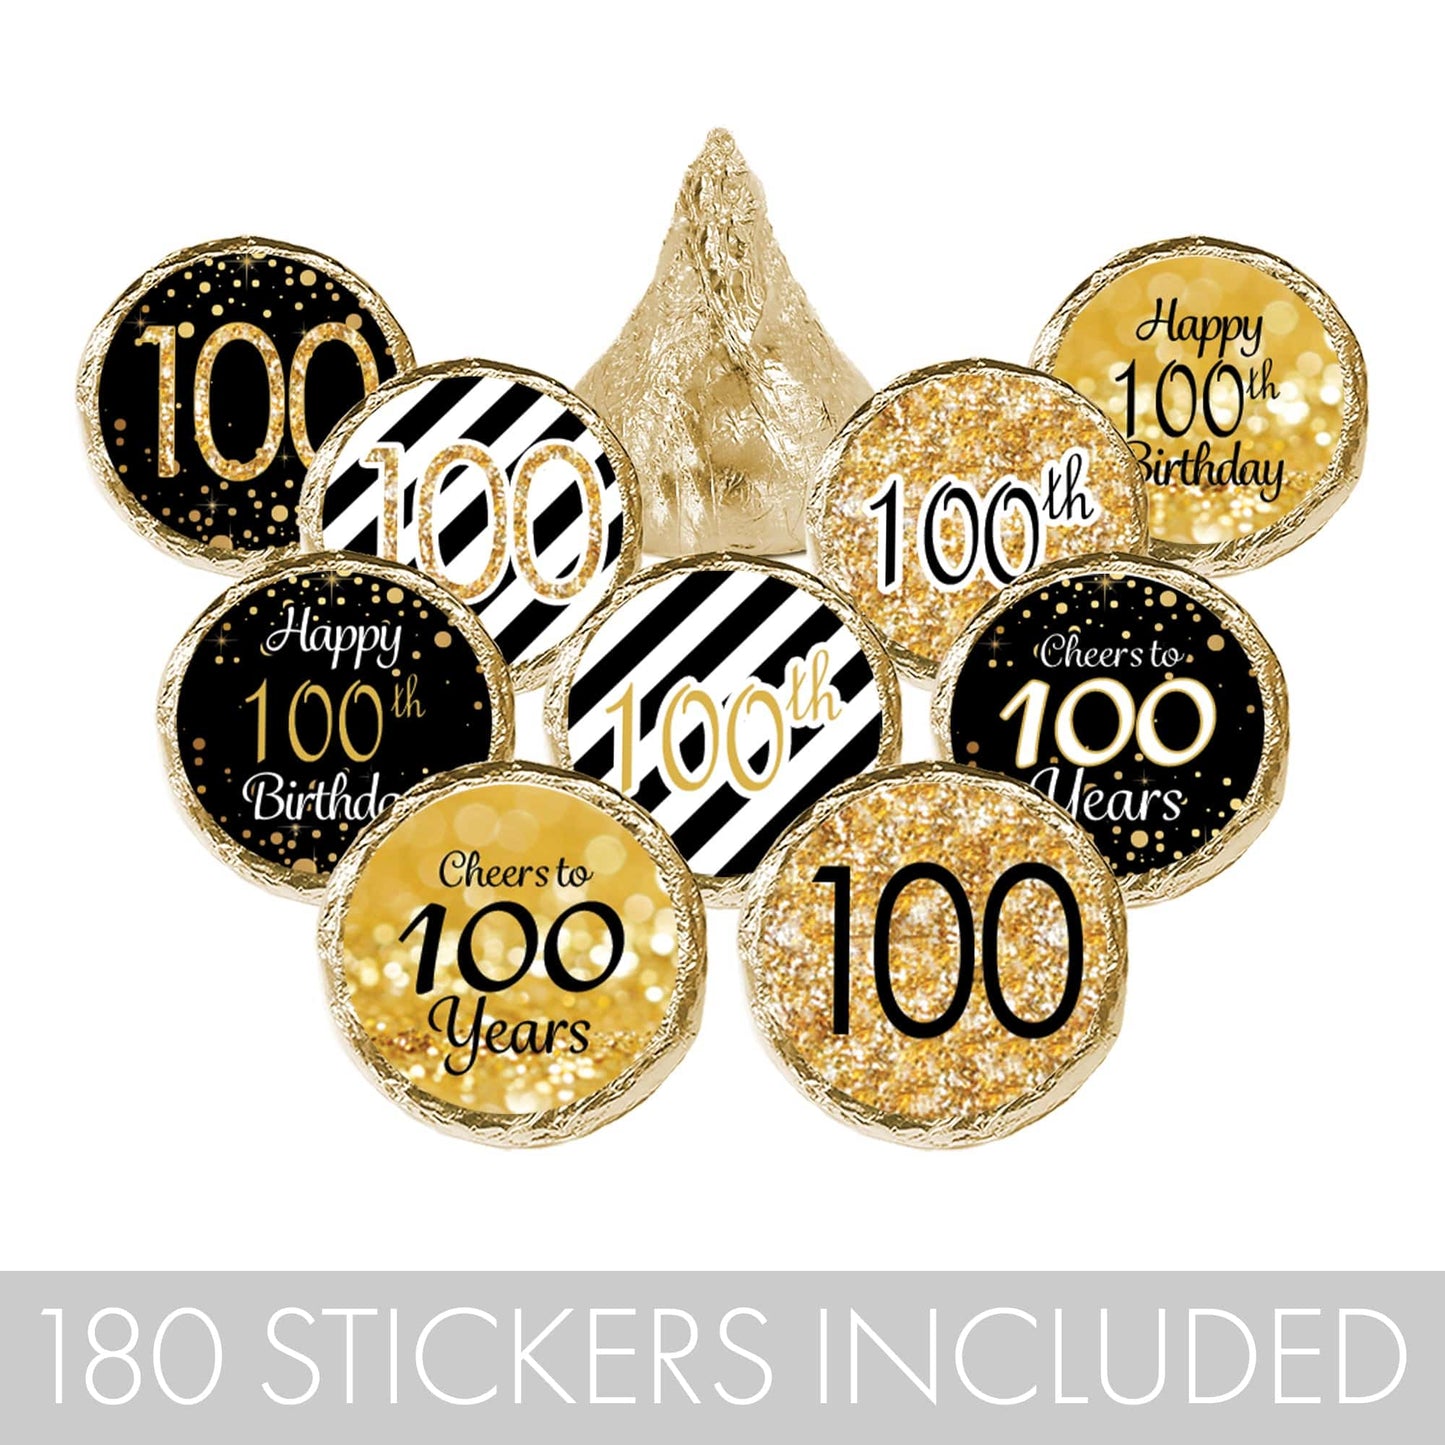 Celebrate the Century - 180 Black and Gold Stickers for a 100th Birthday Party